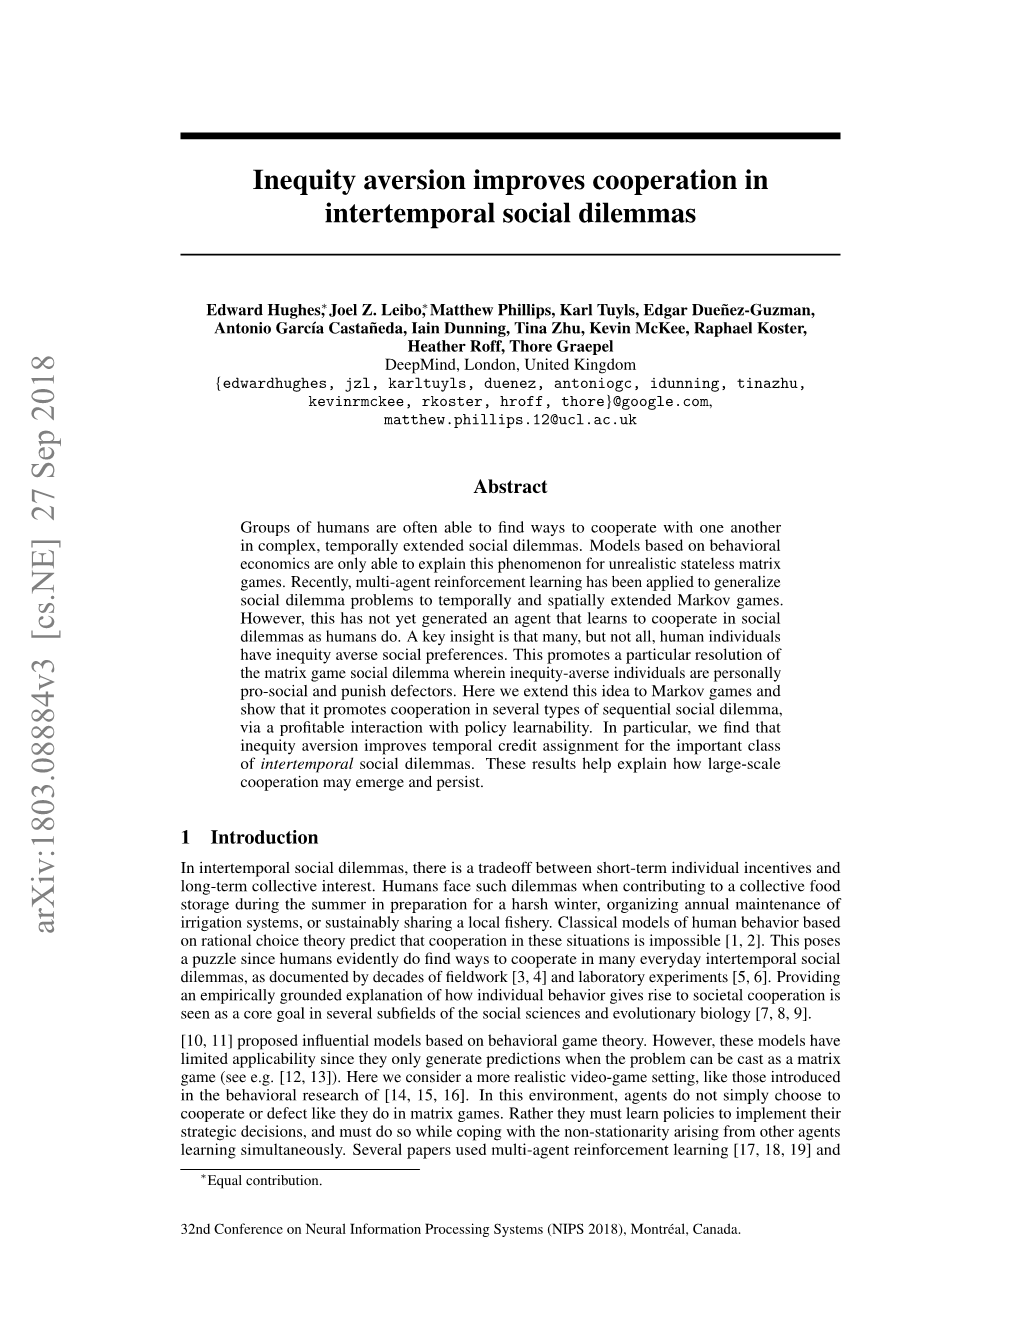 Inequity Aversion Improves Cooperation in Intertemporal Social Dilemmas